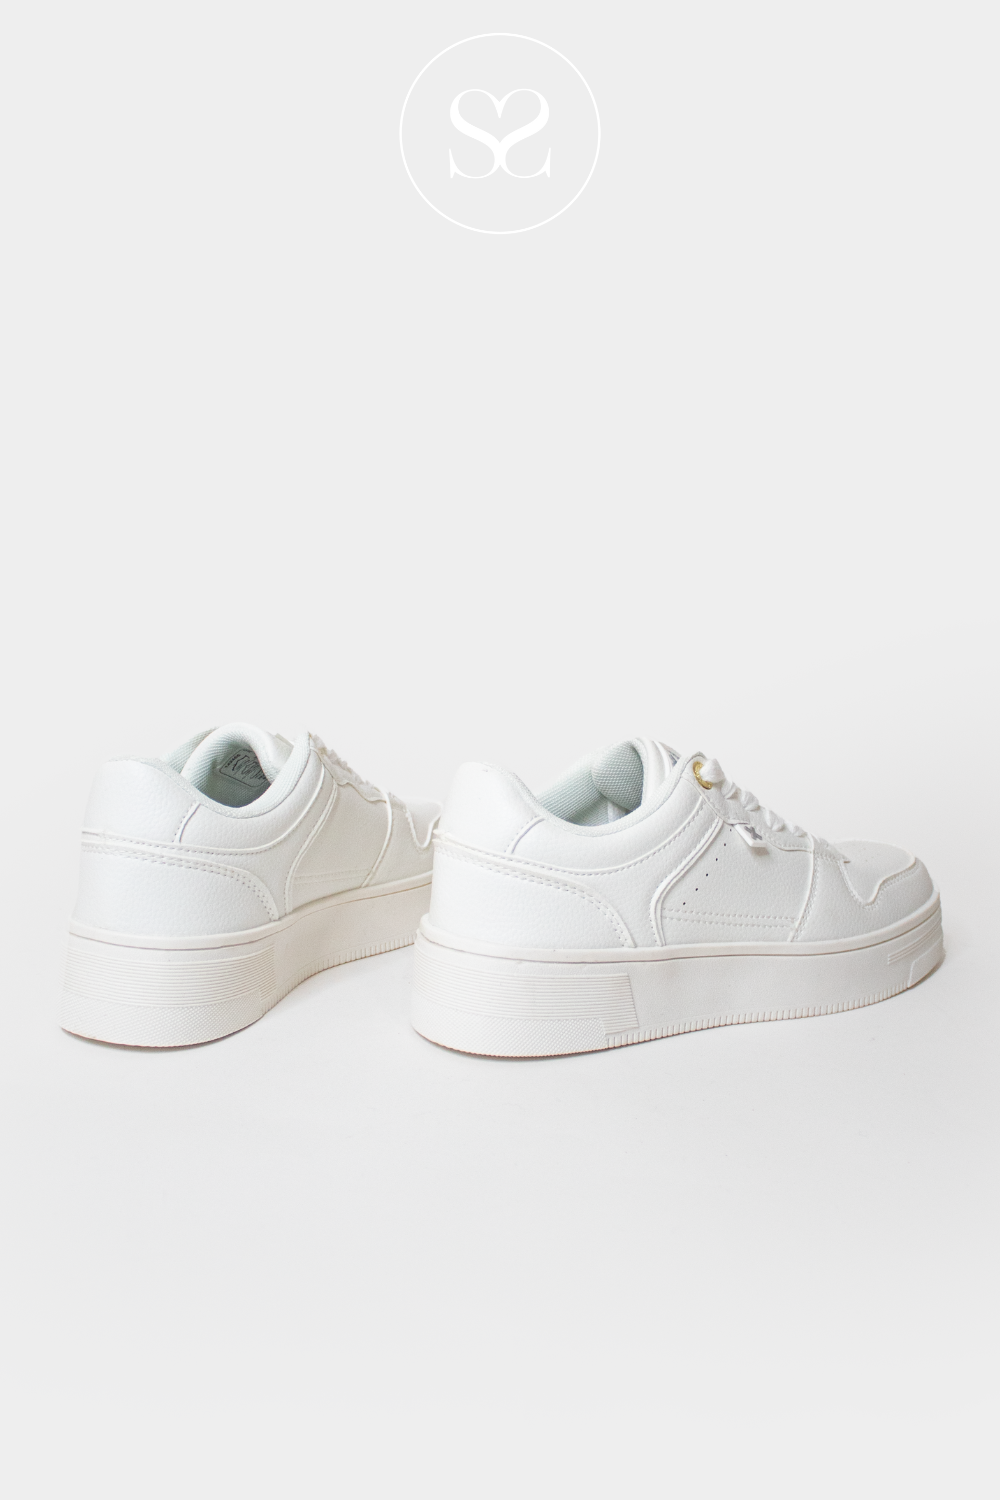 XTI 142466 WHITE FLATFORM CHUNKY LACED TRAINERS